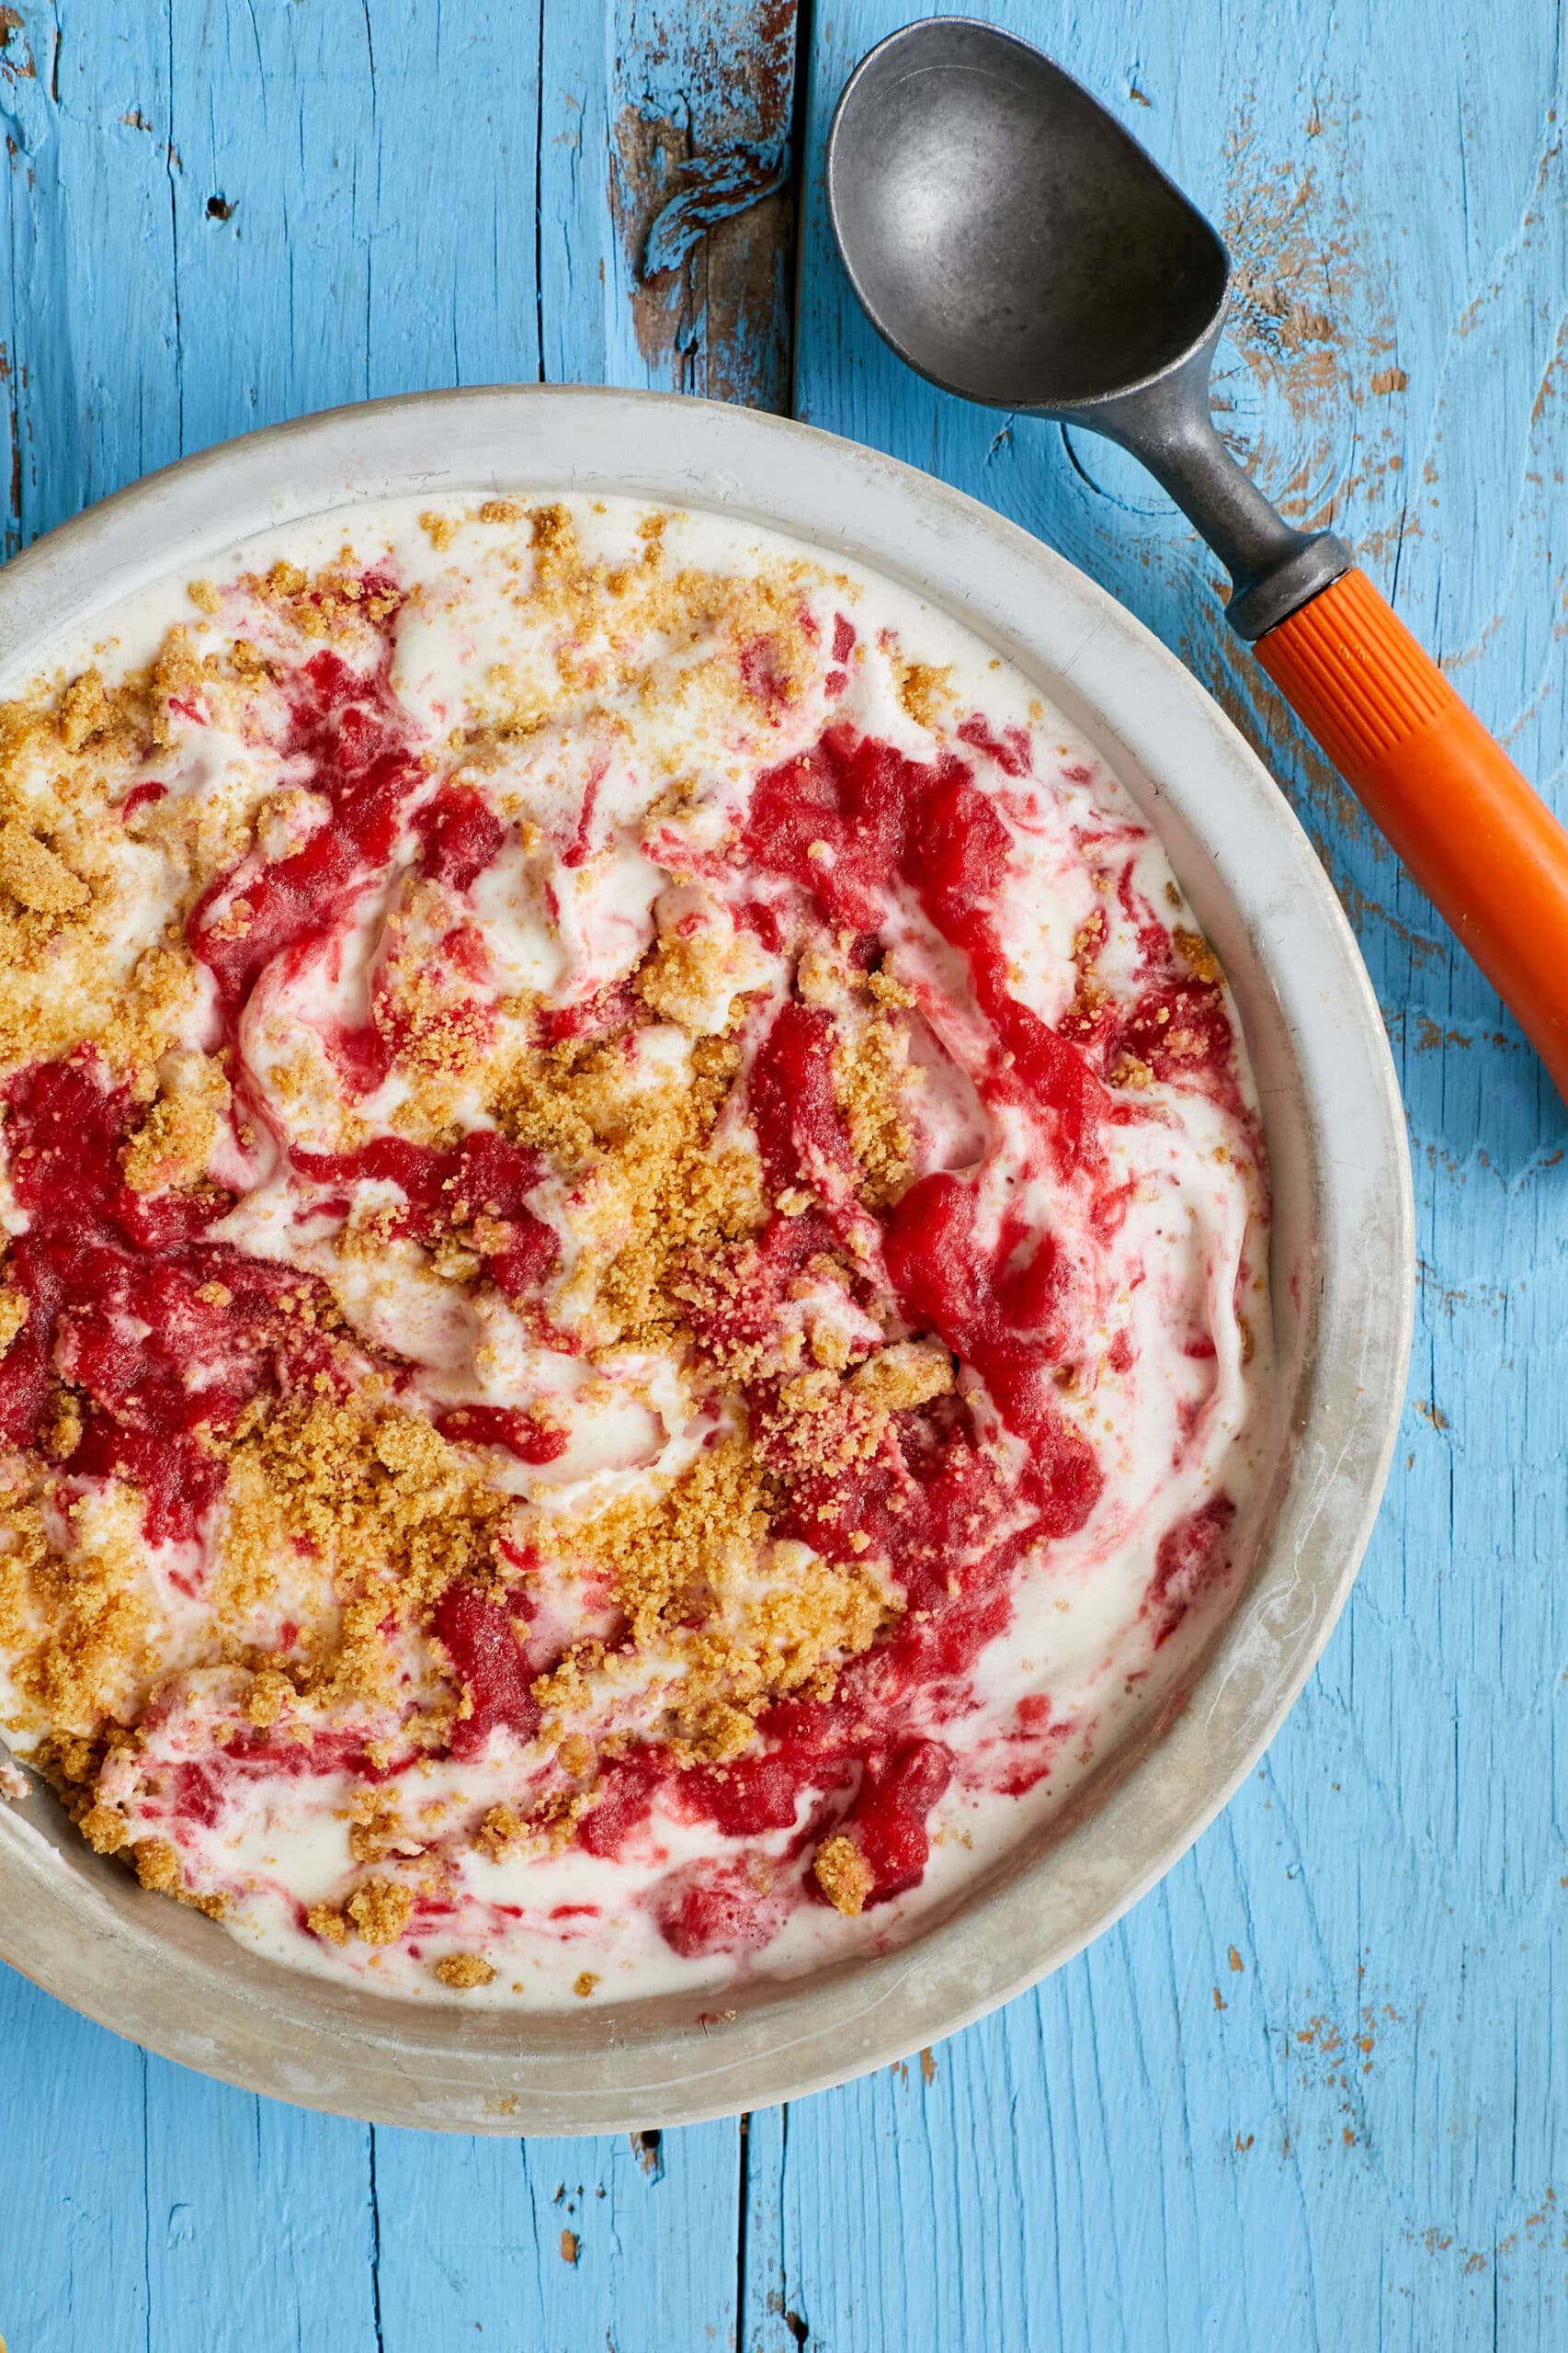 An over-head shot of a bowl of Strawberry Cheesecake Ice Cream shows the creamy, thick ice cream with swirls of jammy strawberries and chunks of buttery Graham cracker crust. An ice cream scoop is on the side.